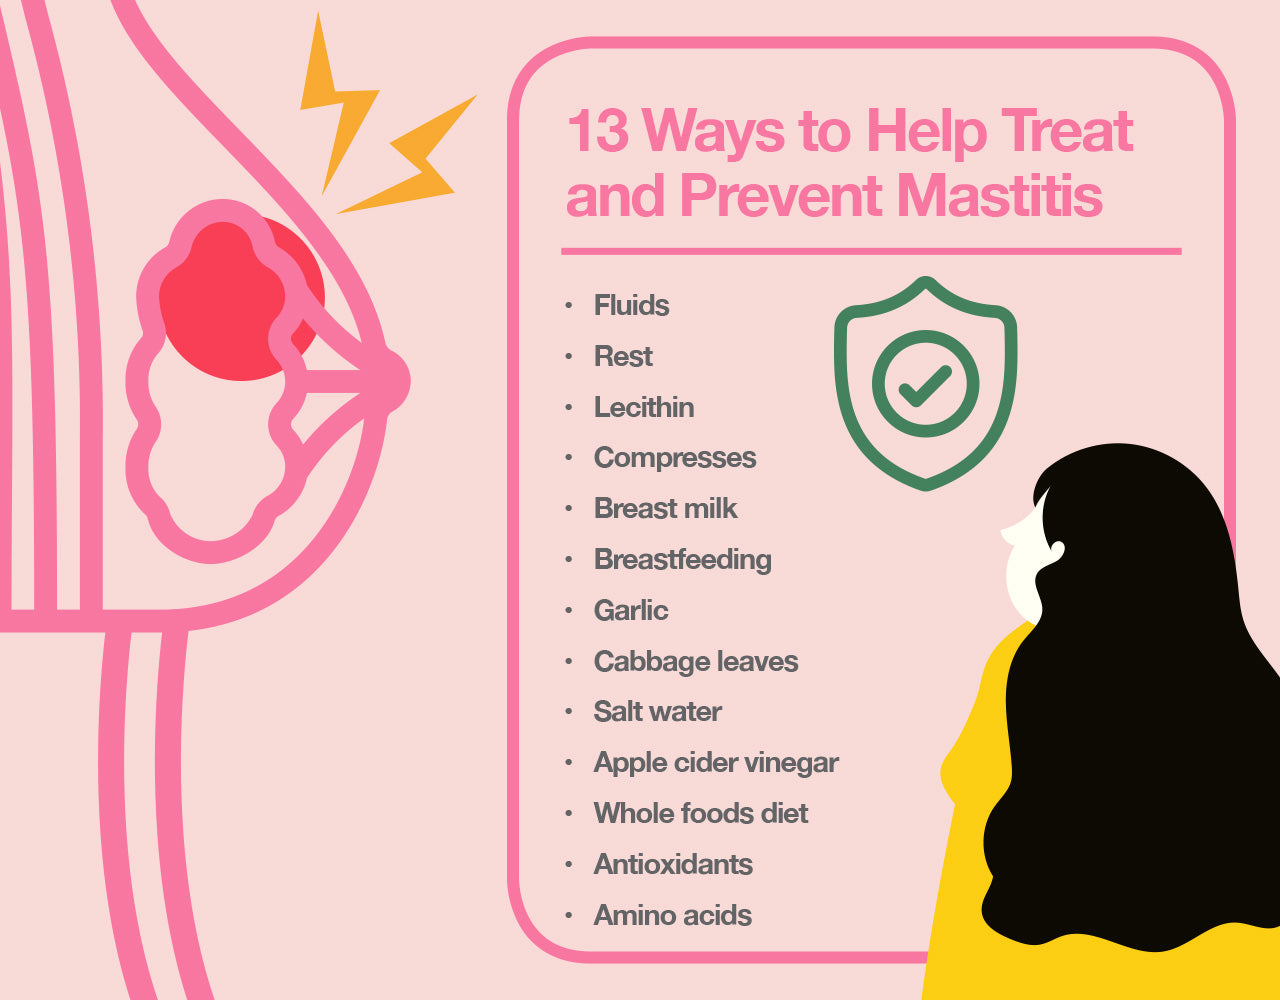 How to Treat and Prevent Mastitis 